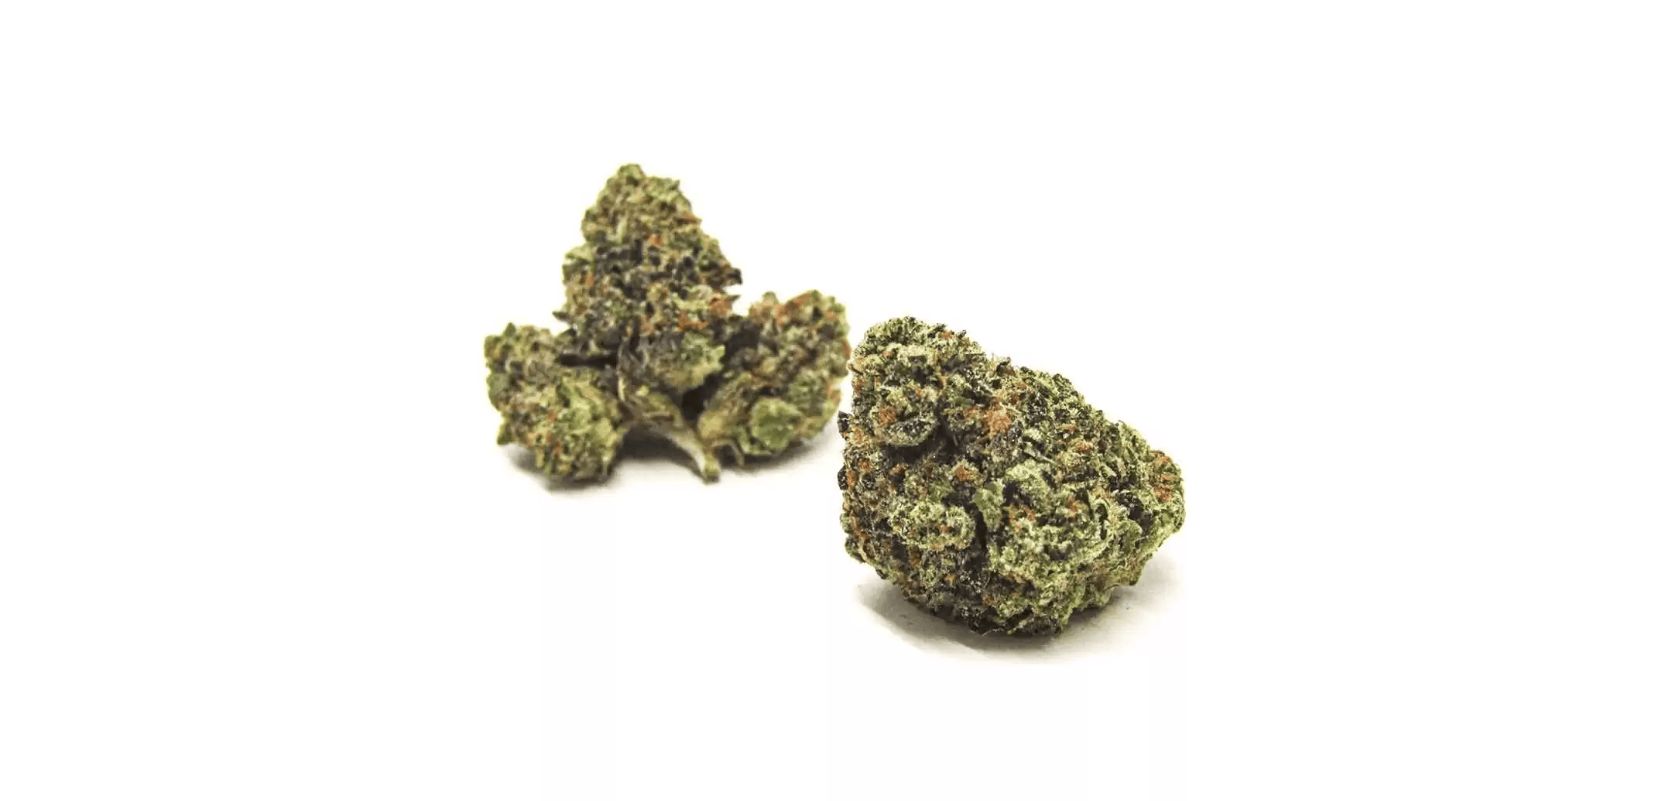 Jealousy strain is, for the sake of accuracy, both sativa and indica, as it is a hybrid.